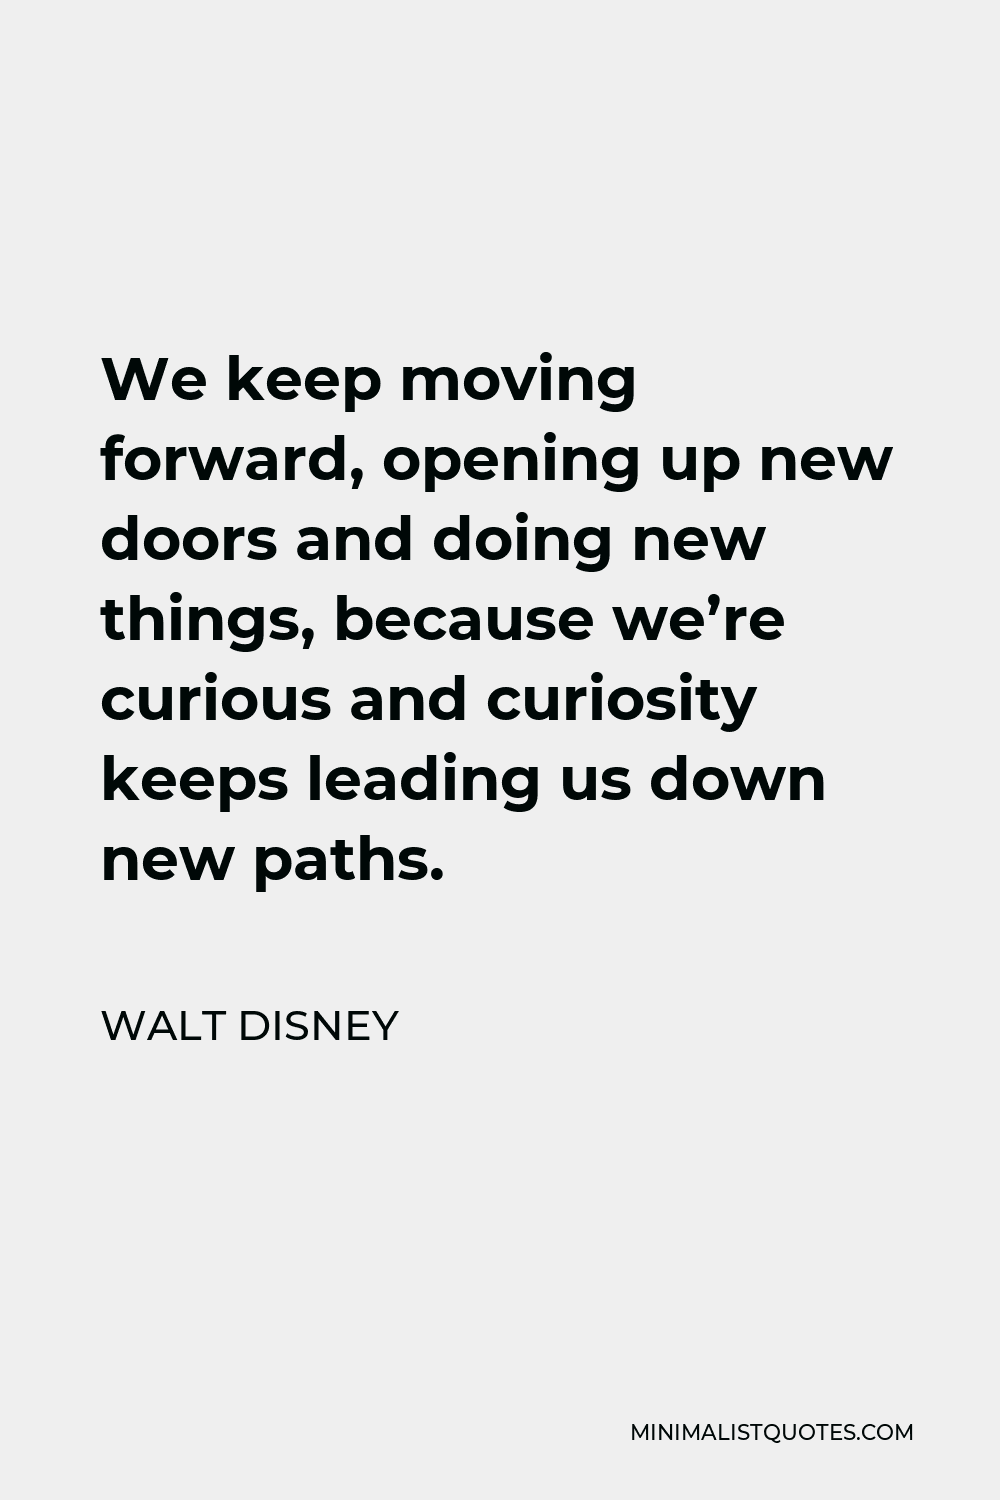 Walt Disney Quote: We keep moving forward, opening up new doors and doing  new things, because we're curious and curiosity keeps leading us down new  paths.